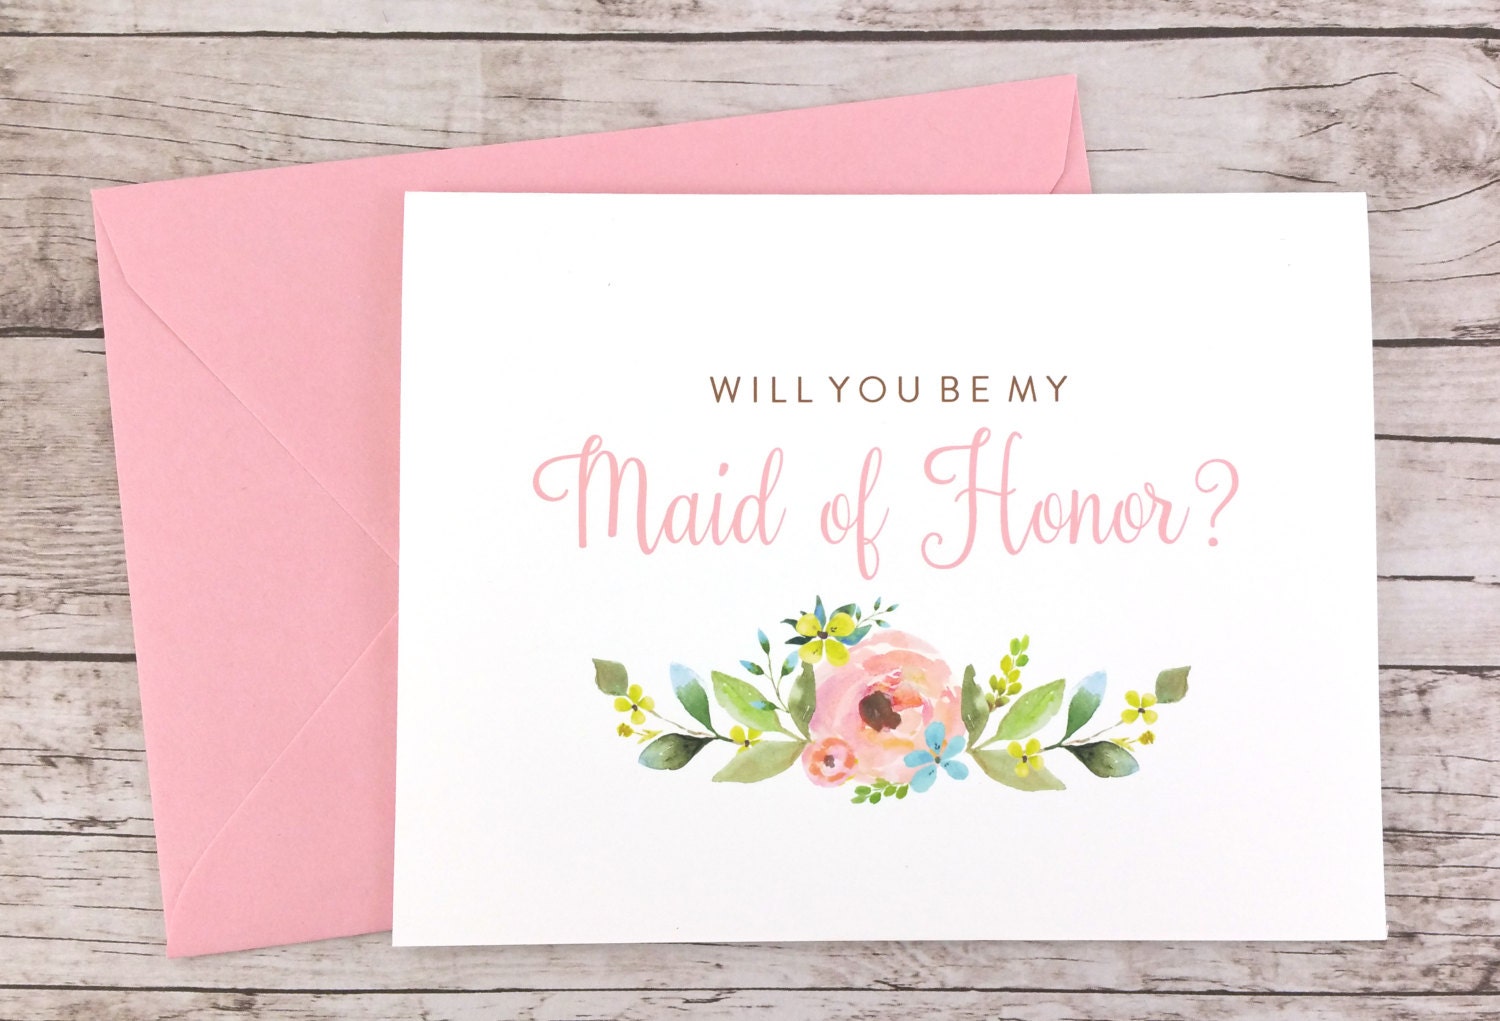 will-you-be-my-maid-of-honor-card-maid-of-honor-proposal